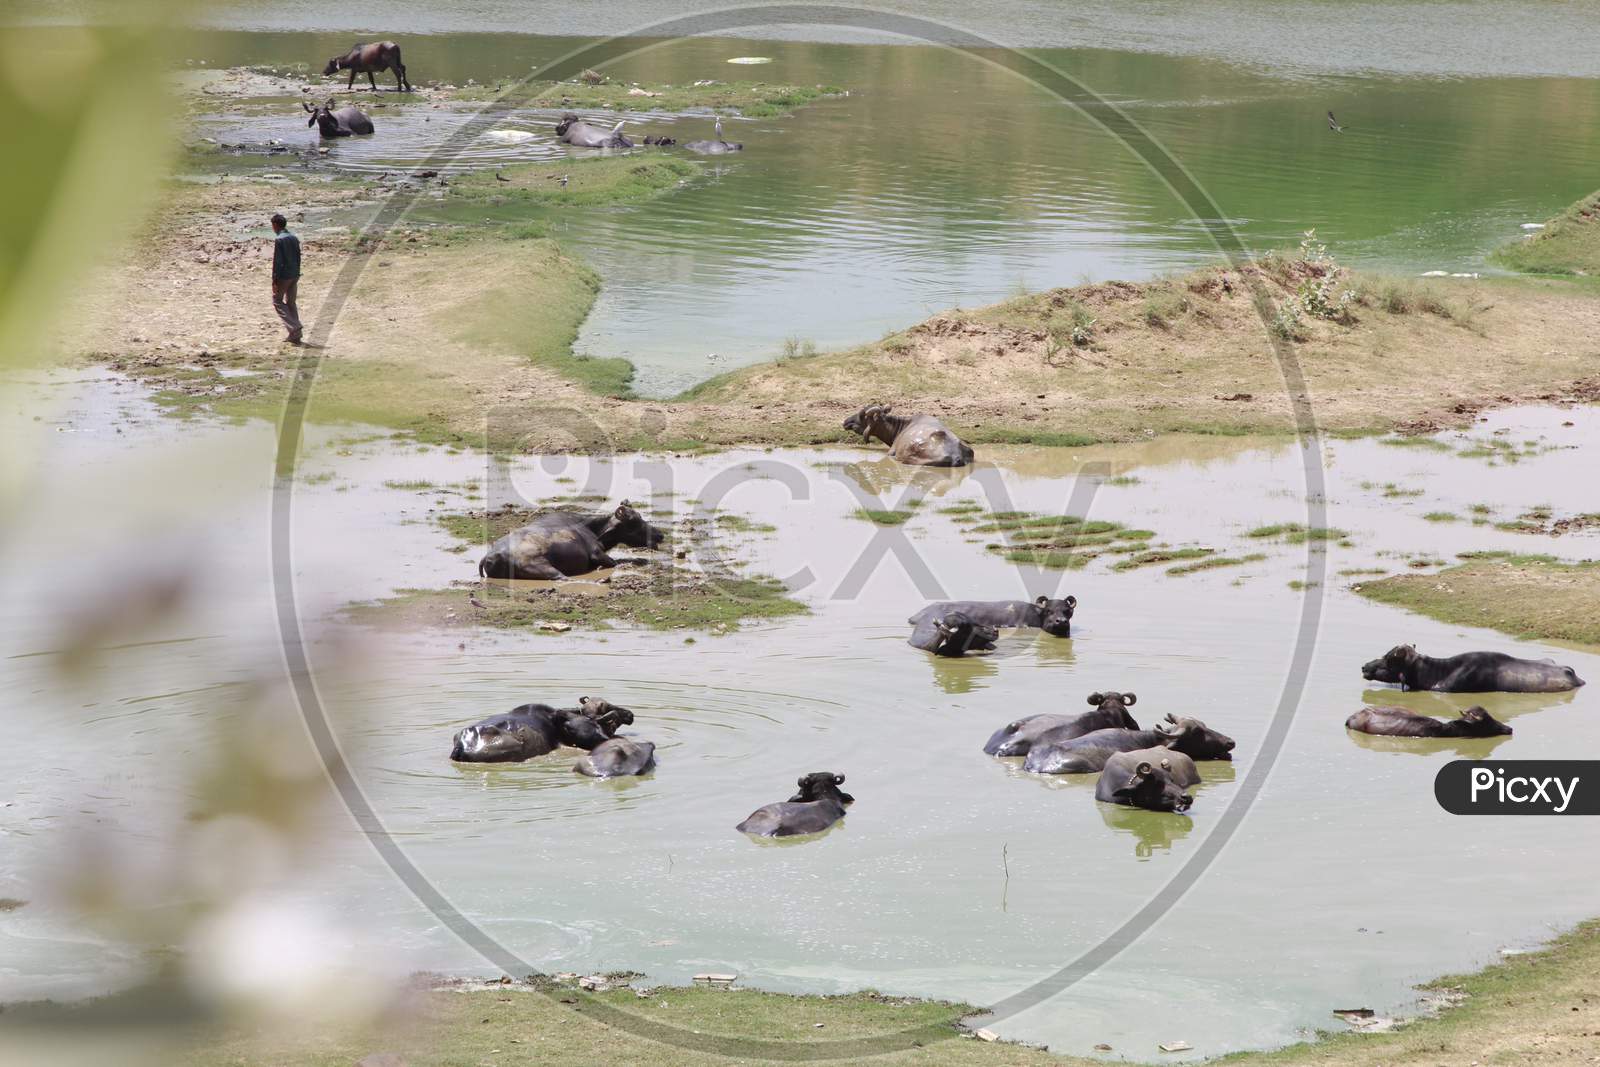 Group of Buffaloes in a Lake during Summer in India